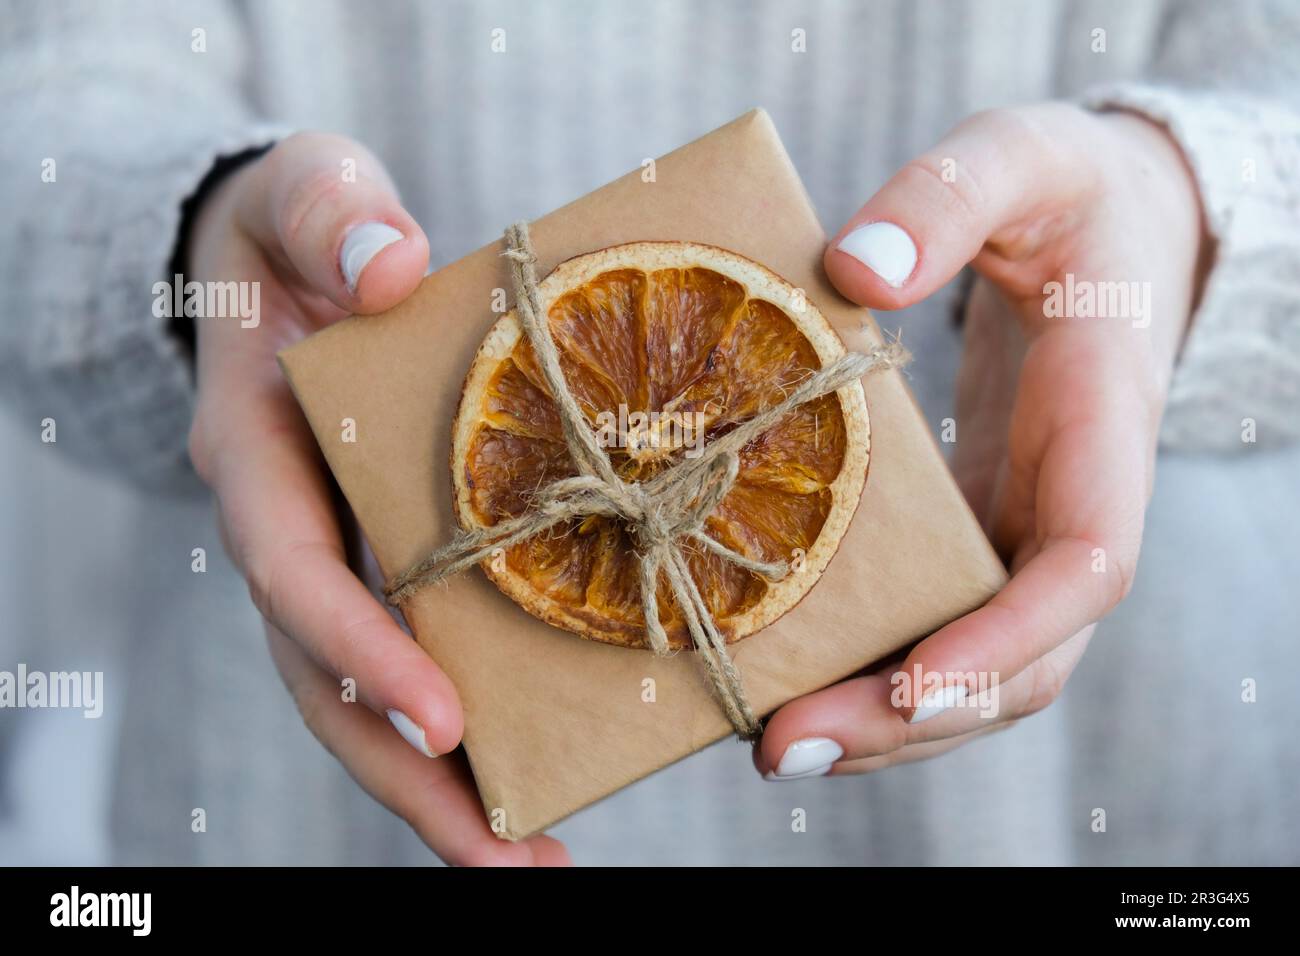 Woman giving Box with New Year's gifts, wrapped in craft paper and decorated with dry orange slices. Holidays and Gifts concept. Stock Photo